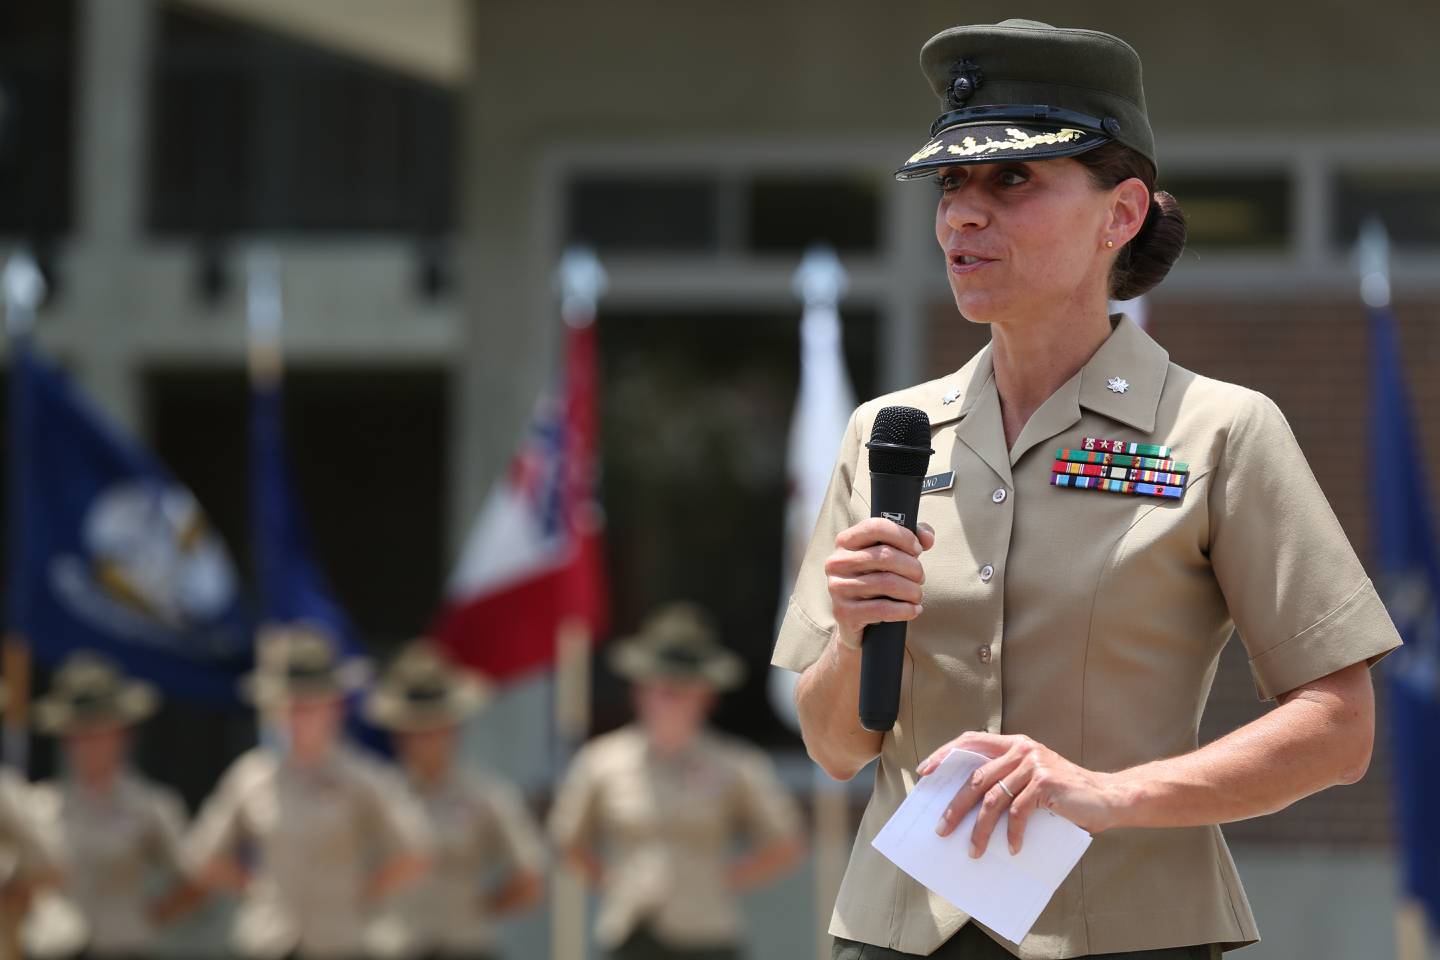 Marine Lt. Col. Kate Germano addresses the audience during the 4th Battalion relief and appointment ceremony at Marine Corps Recruit Depot Parris Island, South Carolina, in 2014.